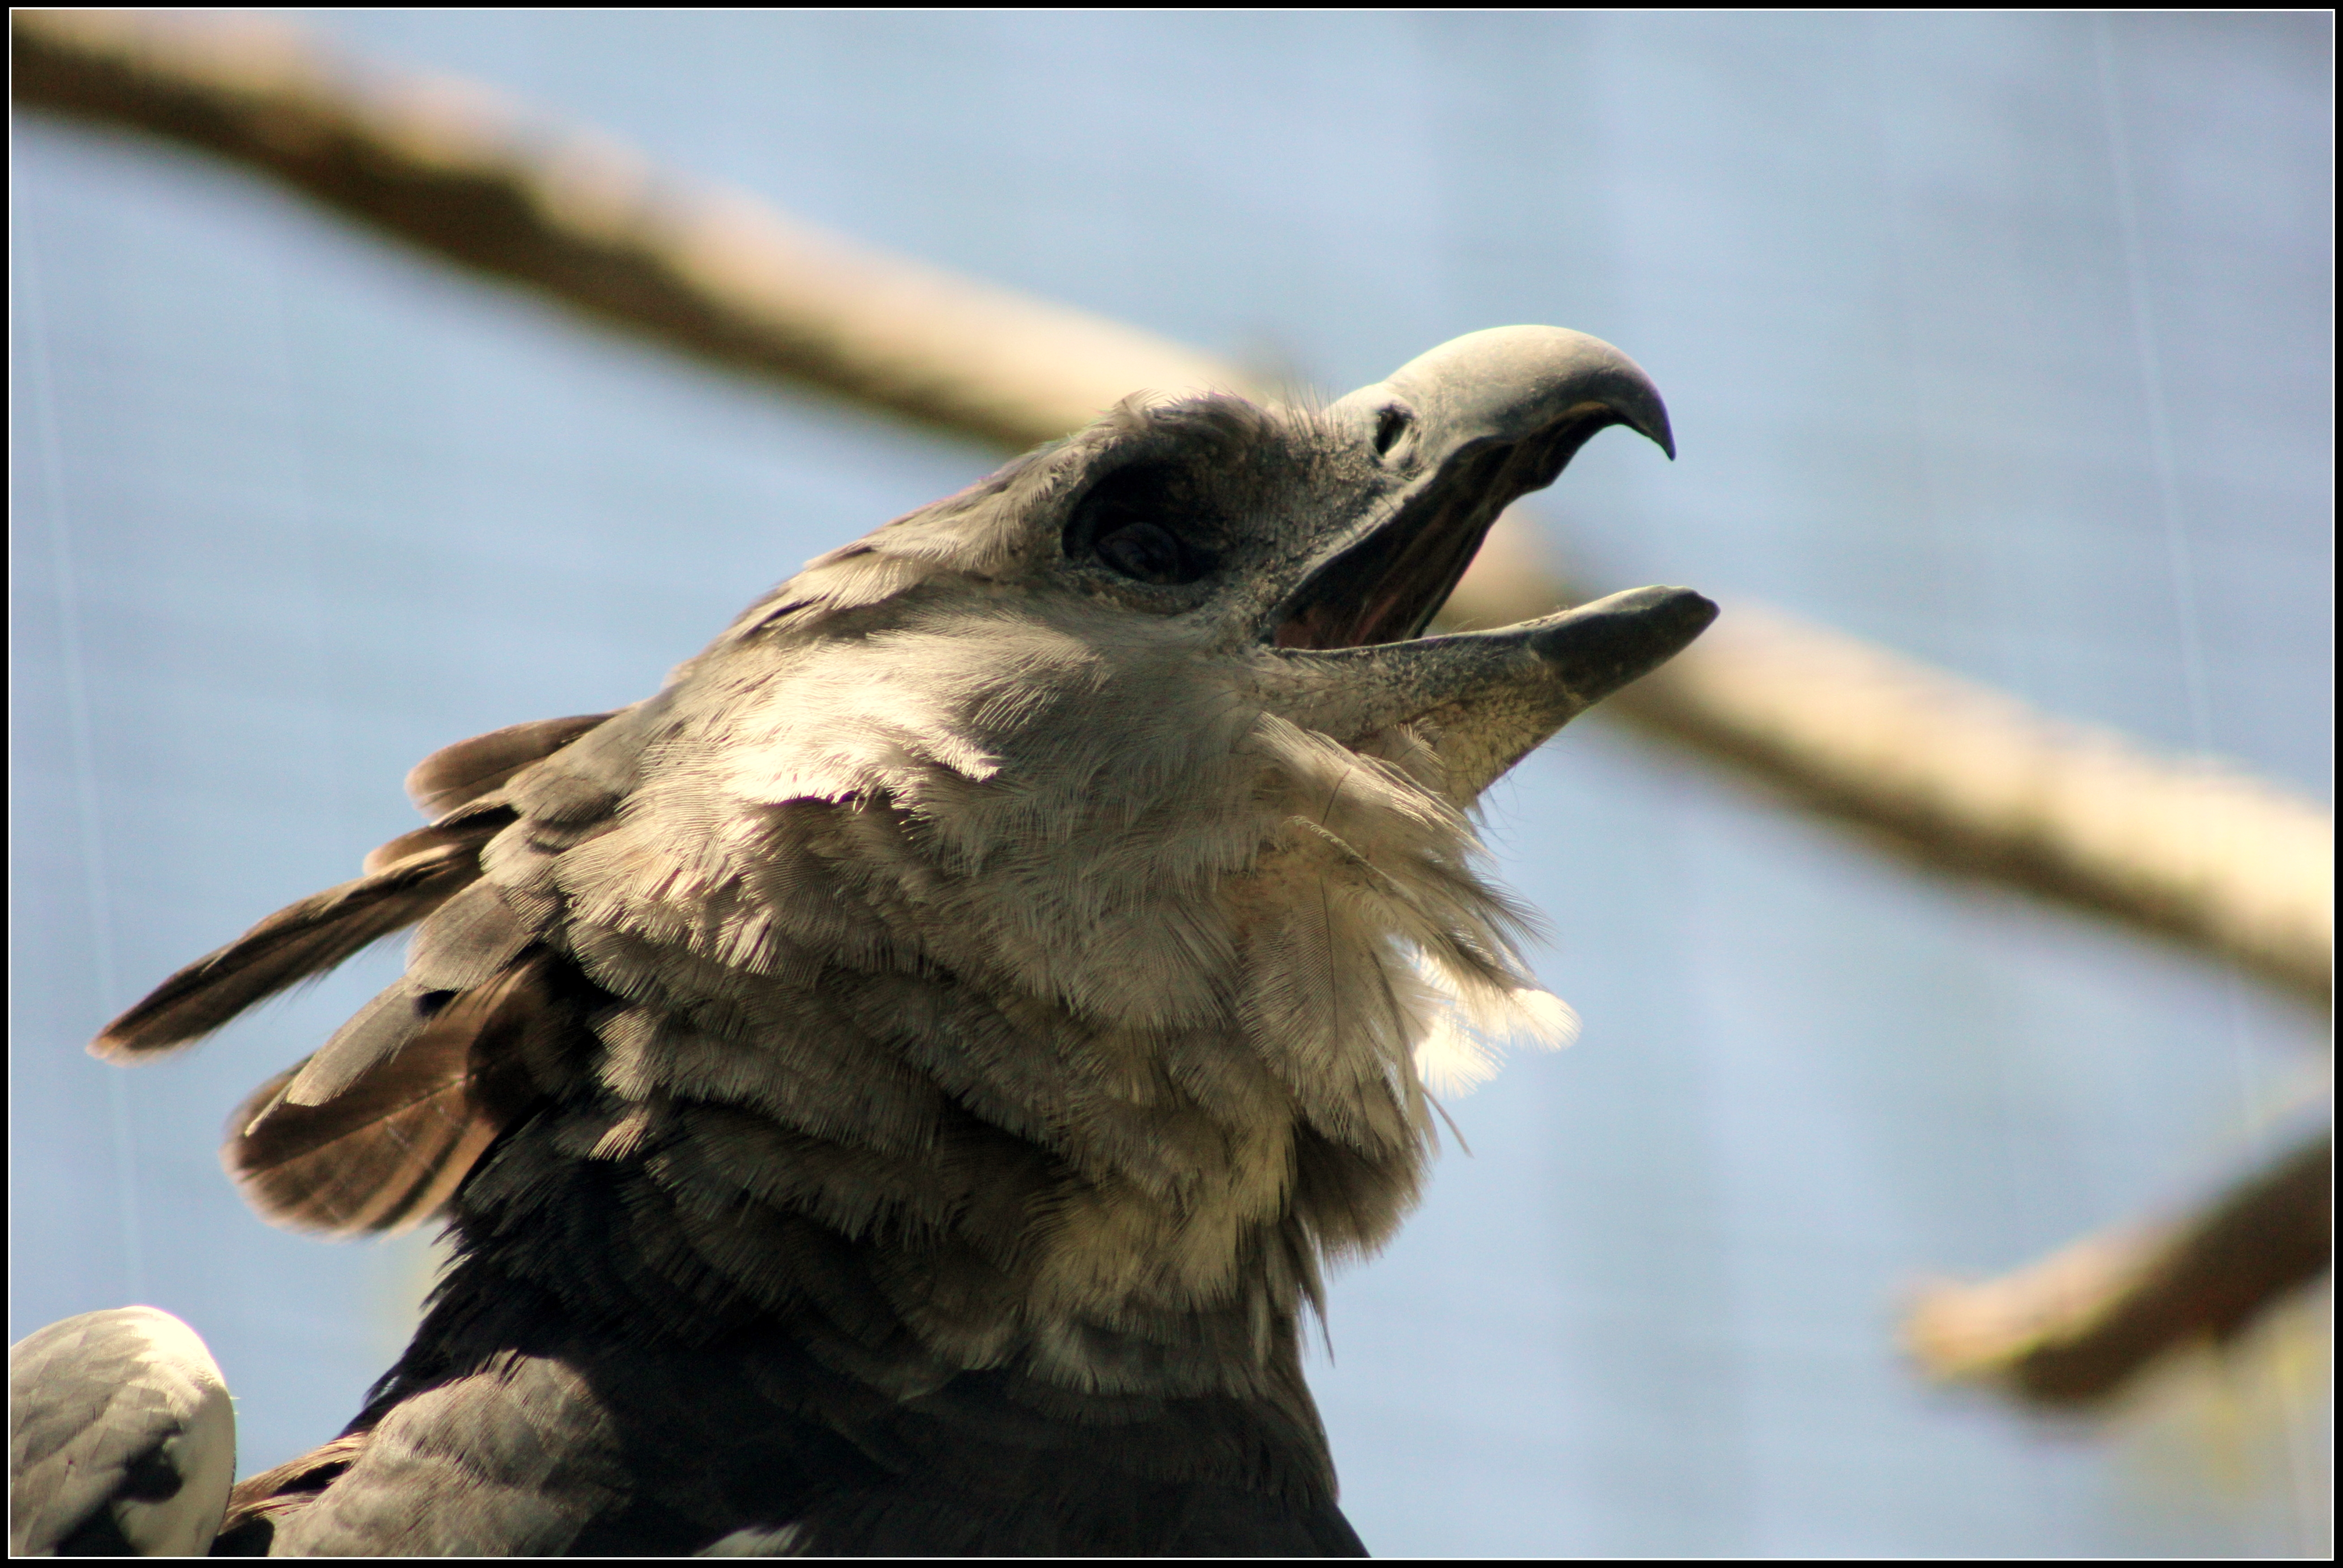 Harpy Eagle mid call. Photo taken by cuatrok77, published on Flickr